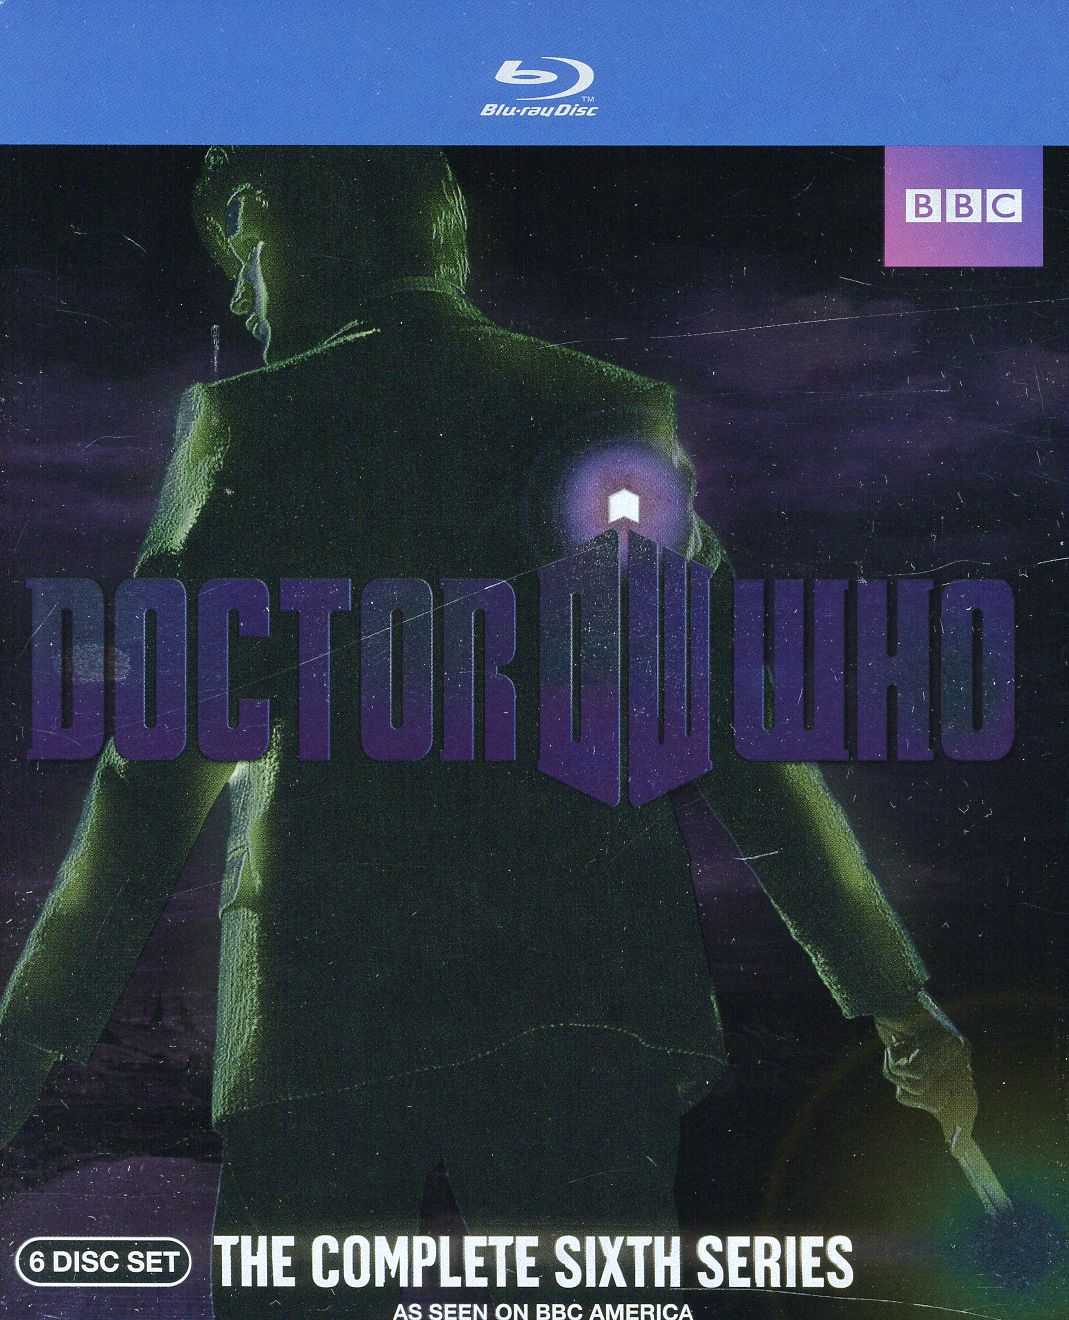 DOCTOR WHO: THE COMPLETE SIXTH SERIES (6PC)